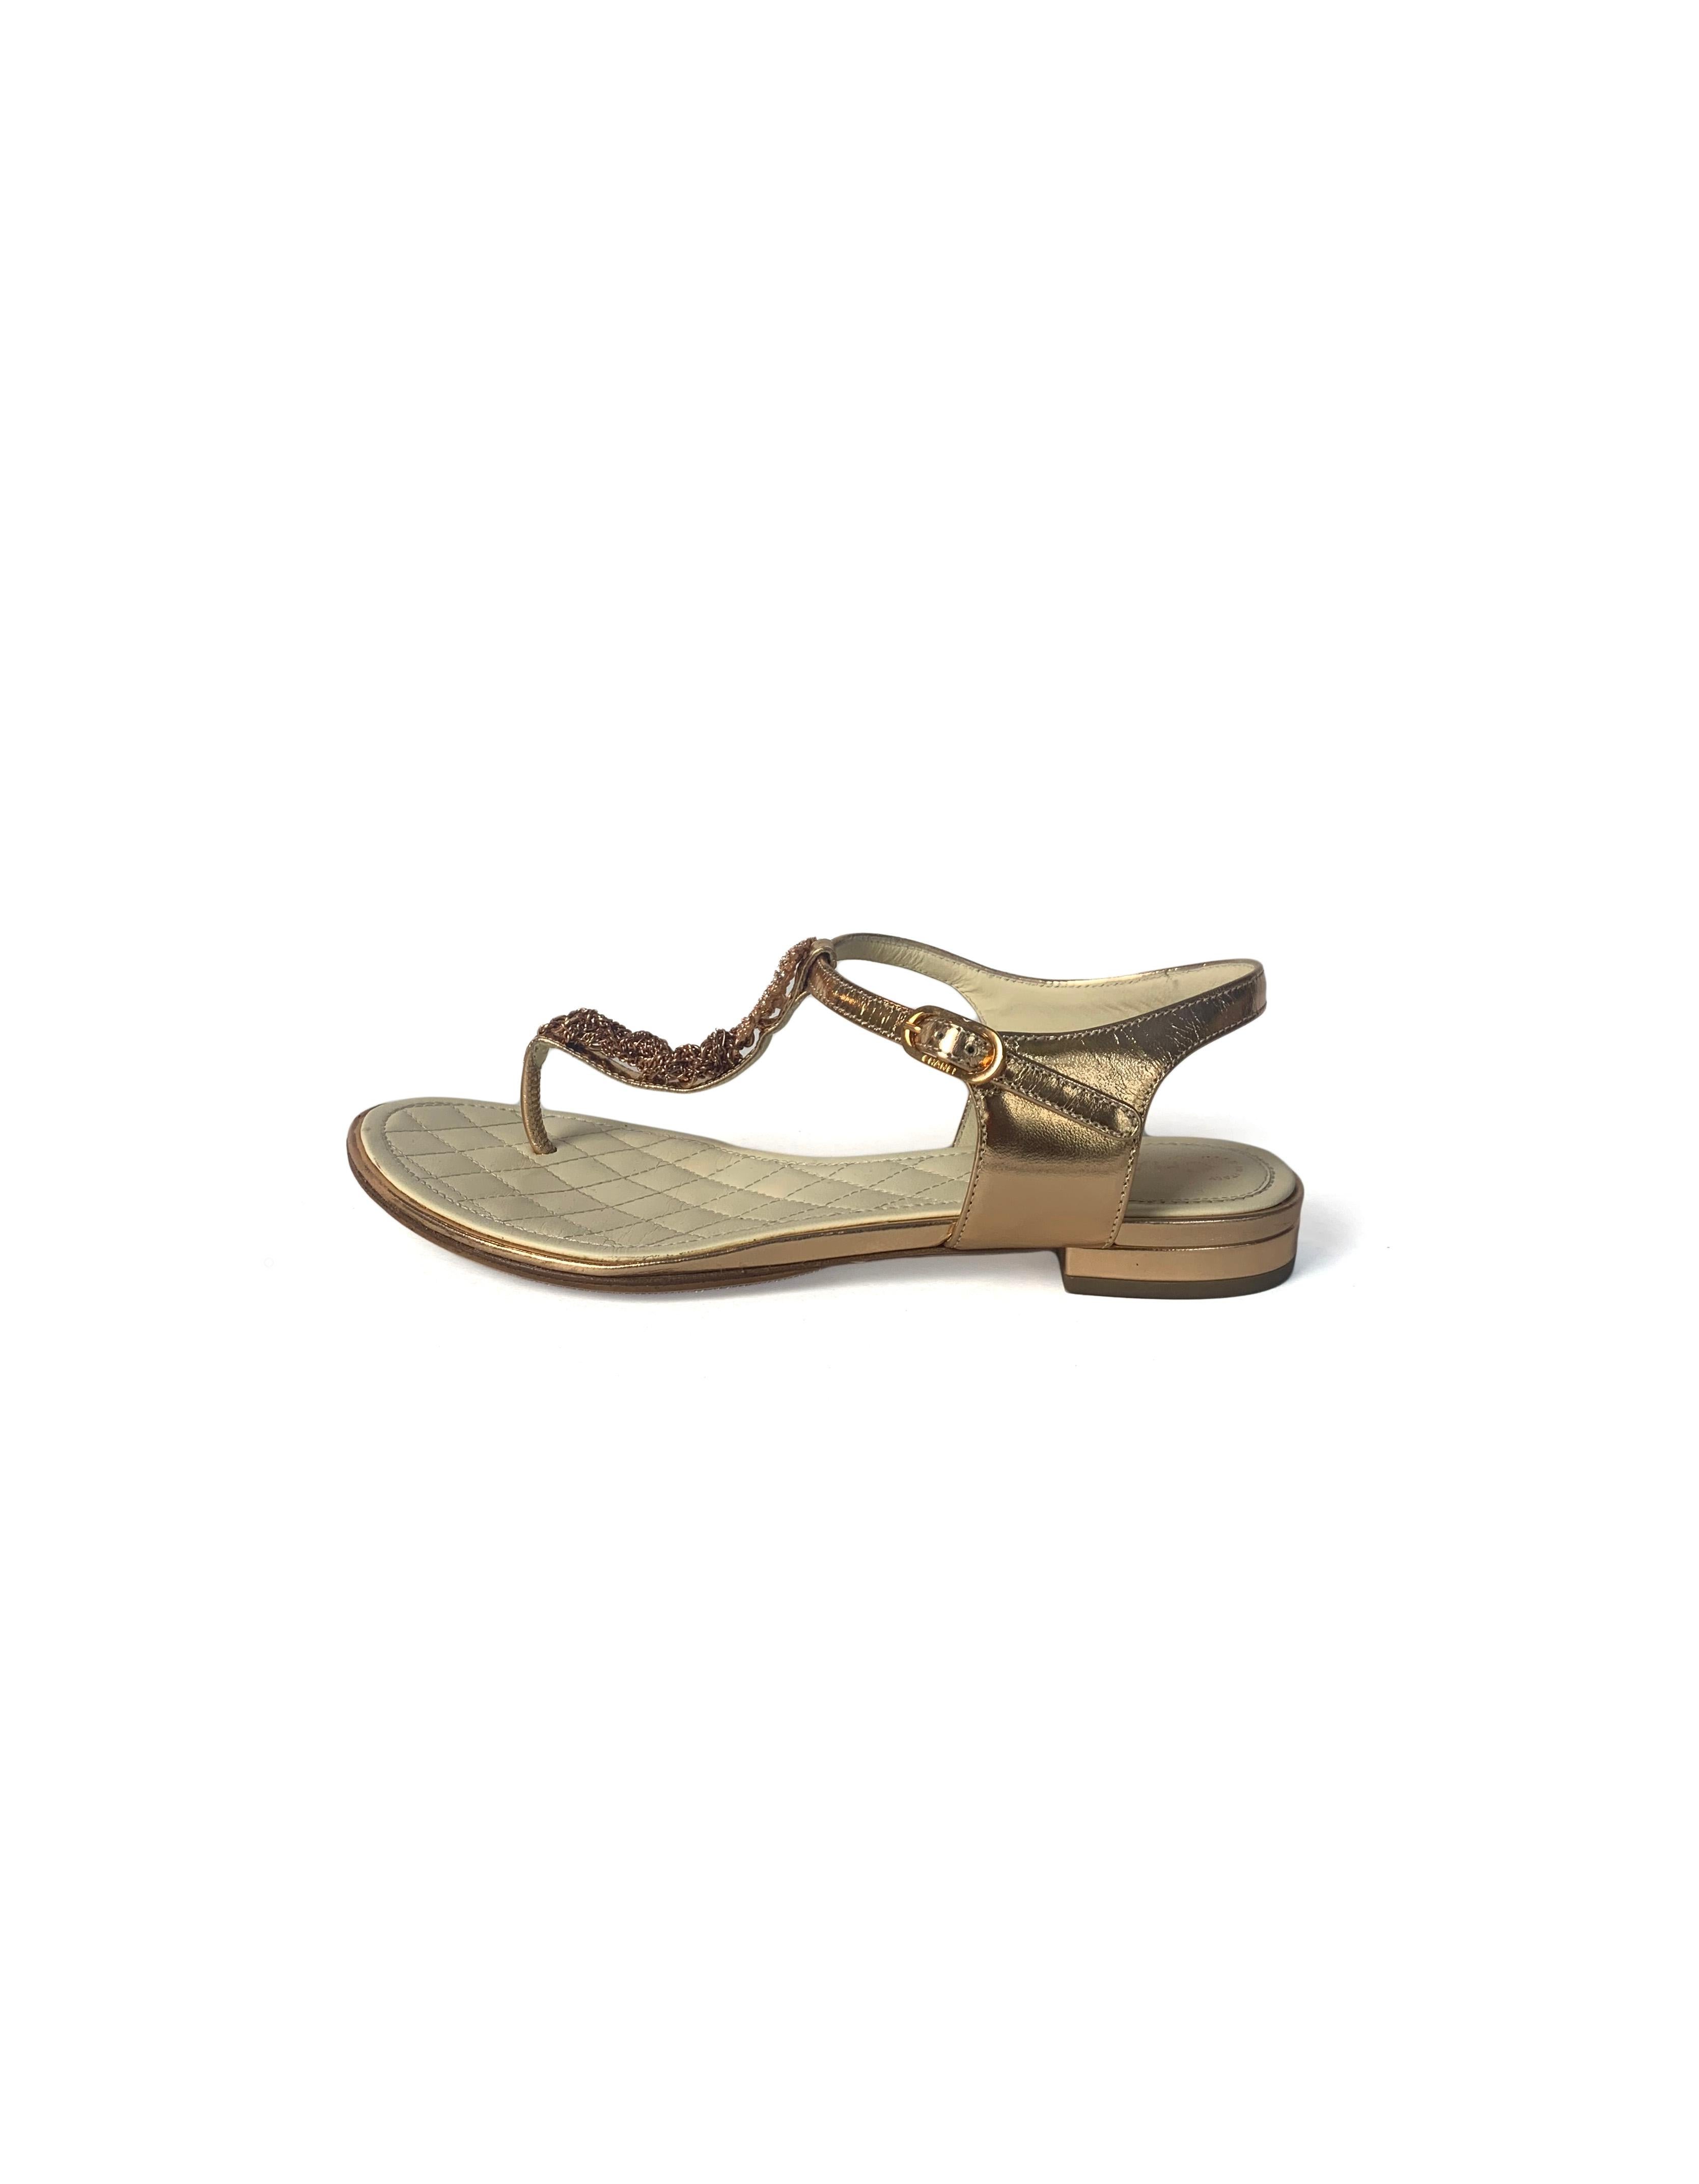 Chanel Rose Gold Thong Sandals.  Features braided chain-link detailing and crystal encrusted CC

Made In: Italy
Year of Production: 2015
Color: Rose gold
Hardware: Rose gold
Materials: Leather, metal, strass crystals
Closure/Opening: Adjustable